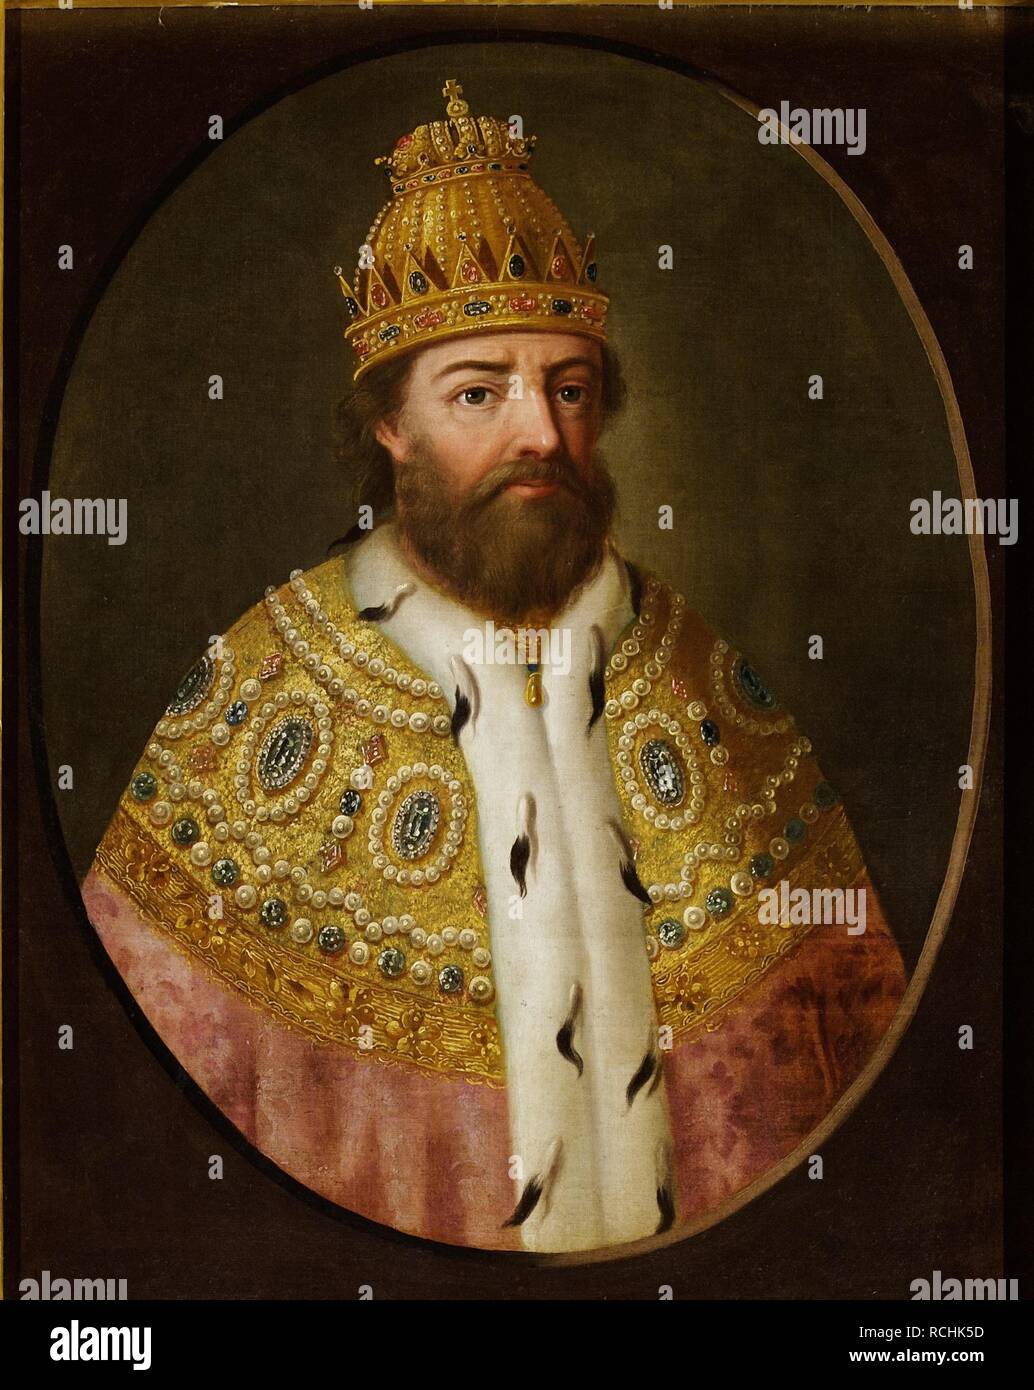 Portrait of Boris Godunov. Museum: State History Museum, Moscow. Author: ANONYMOUS. Stock Photo